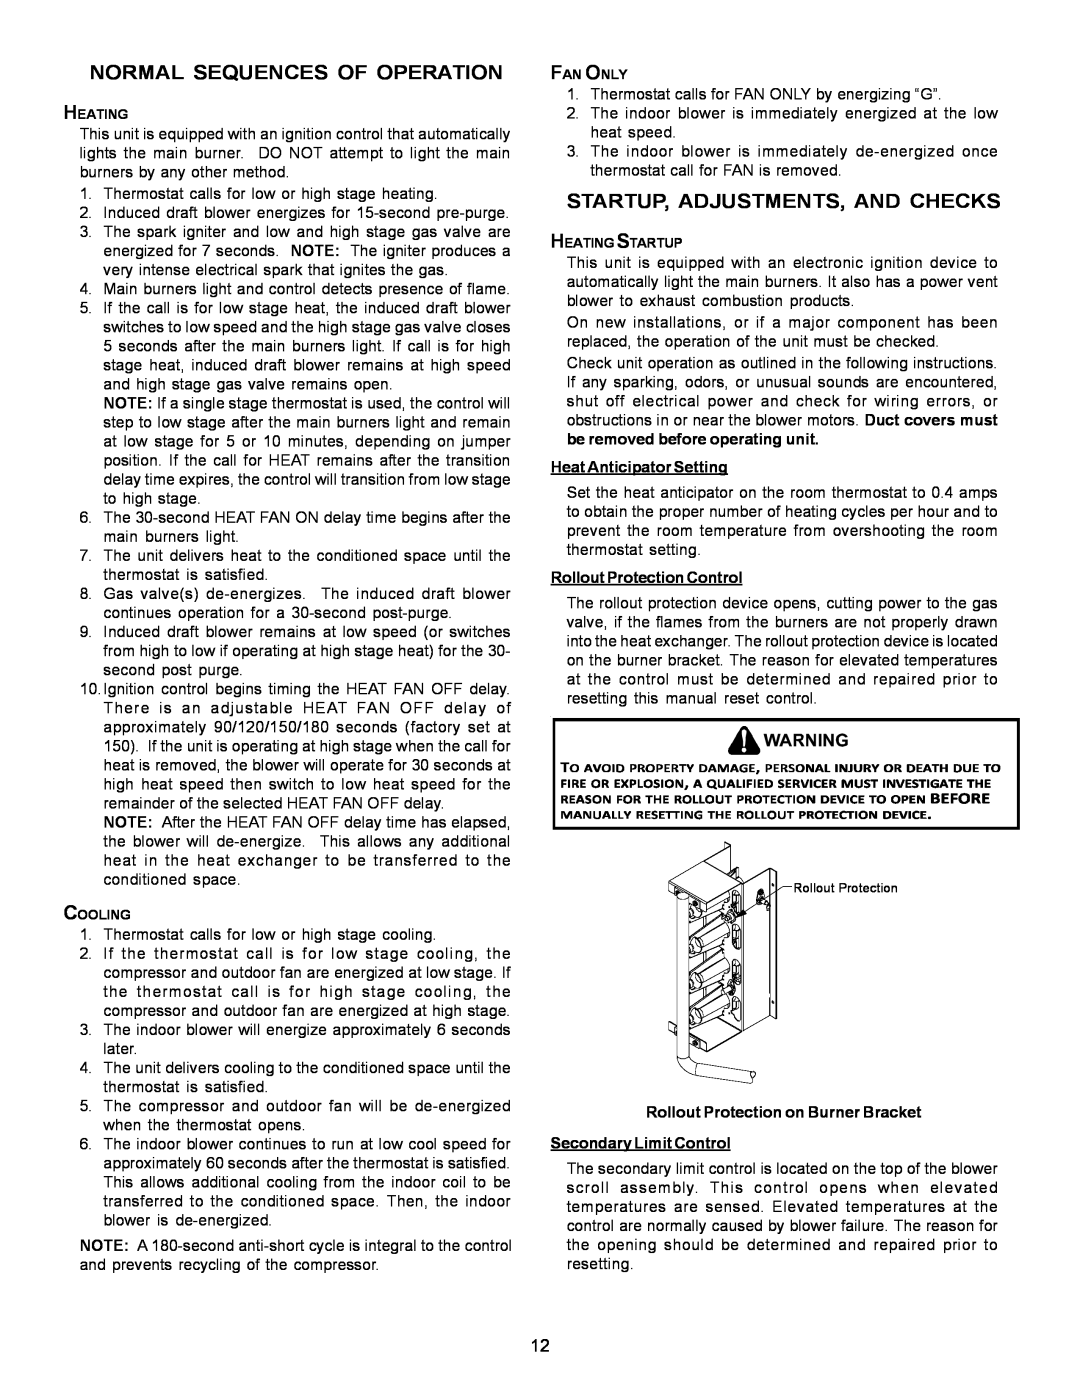 Goodman Mfg PG 15 specifications Normal Sequences Of Operation, Startup, Adjustments, And Checks, Heat Anticipator Setting 